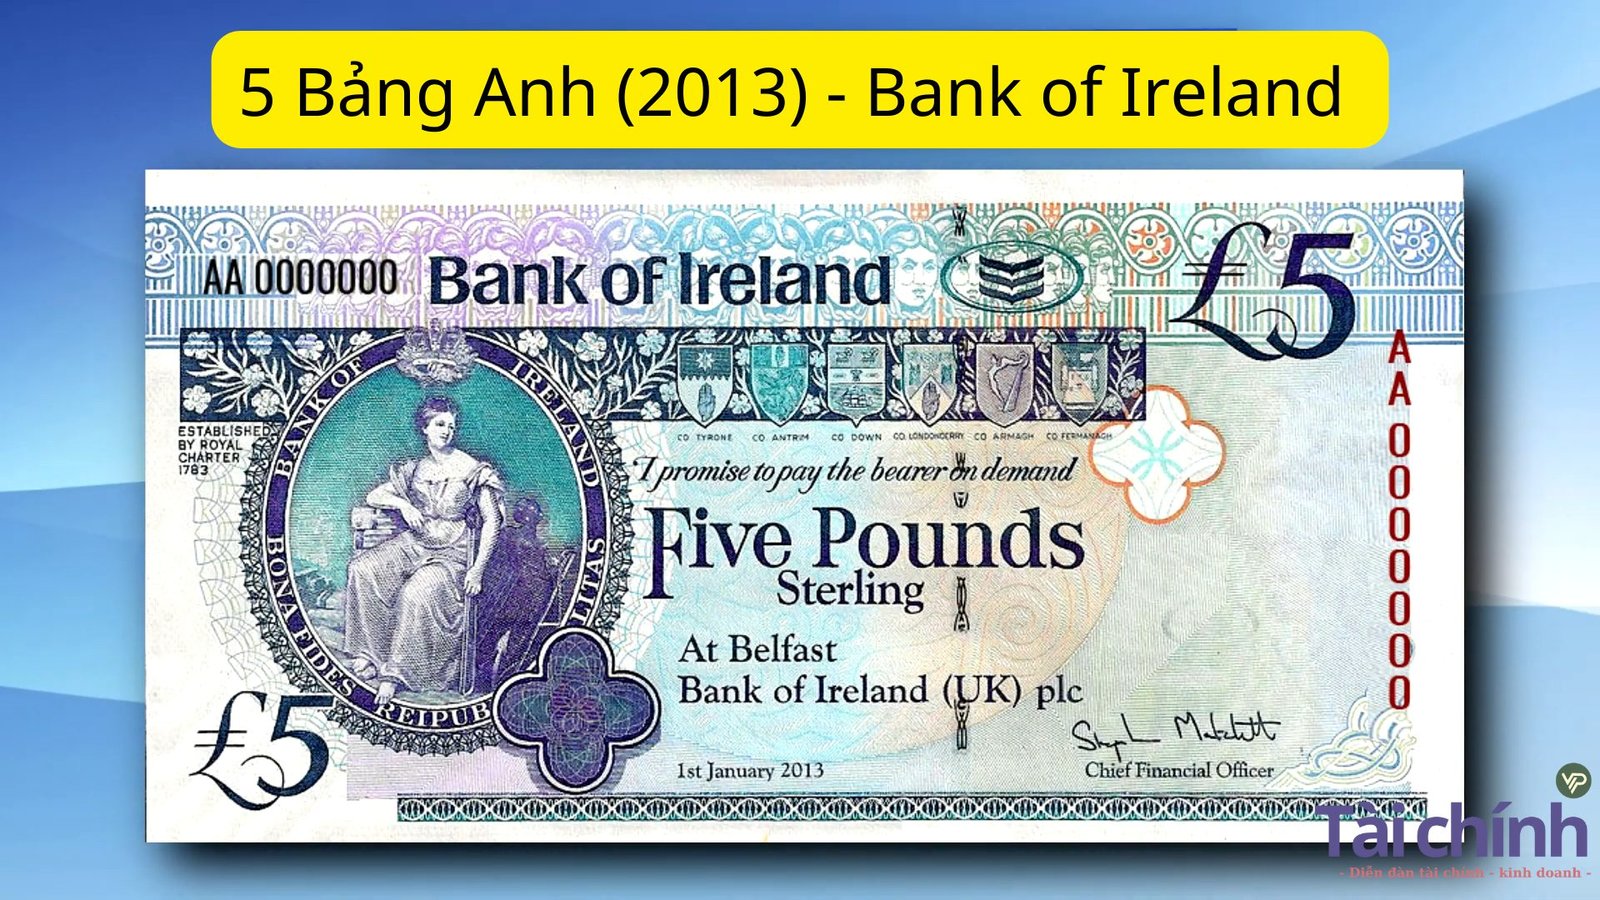 5 Bảng Anh (2013) - Bank of Ireland